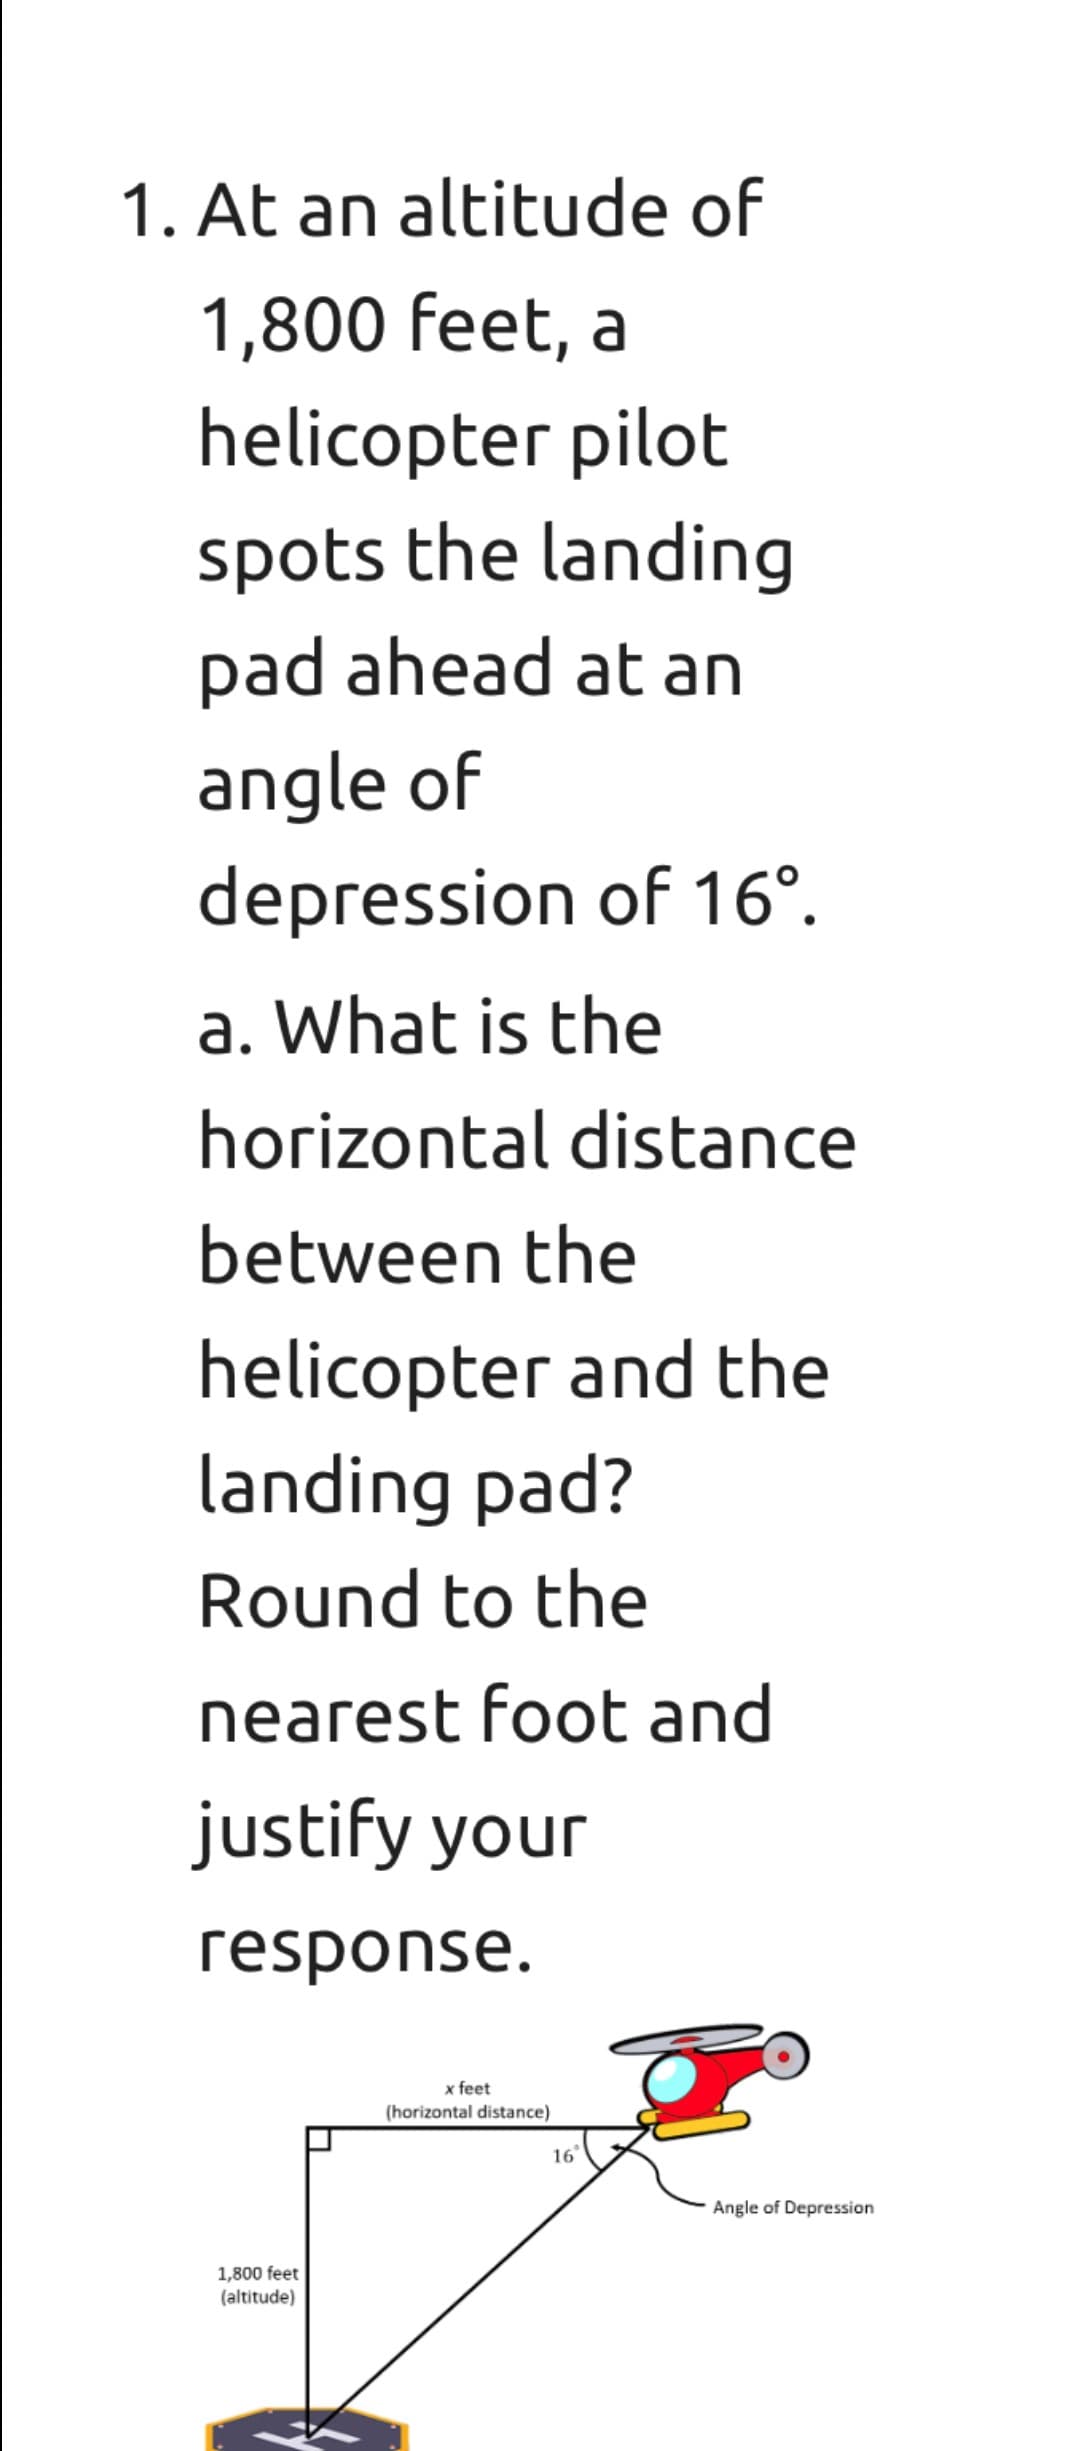 1. At an altitude of
1,800 feet, a
helicopter pilot
spots the landing
pad ahead at an
angle of
depression of 16°.
a. What is the
horizontal distance
between the
helicopter and the
landing pad?
Round to the
nearest foot and
justify your
response.
x feet
(horizontal distance)
16
Angle of Depression
1,800 feet
(altitude)
